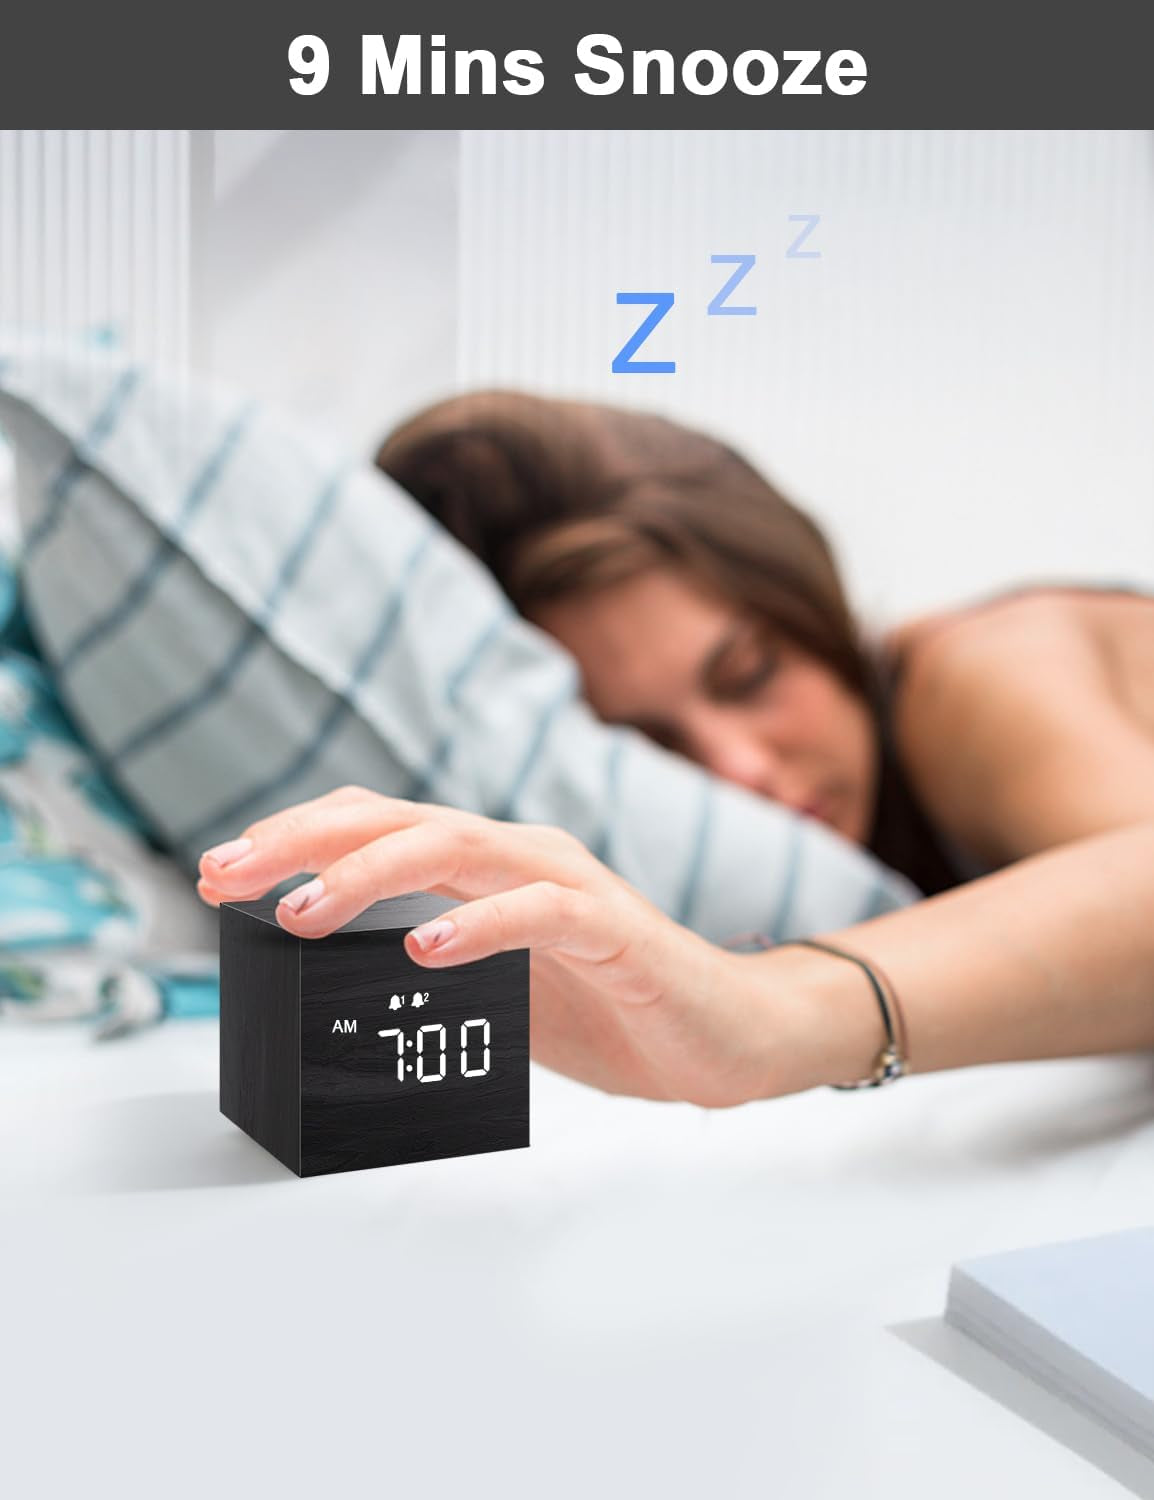 Digital Alarm Clock, with Wooden Electronic LED Time Display, Dual Alarm, 2.5-Inch Cubic Small Mini Wood Made Electric Clocks for Bedroom, Bedside, Desk, Black